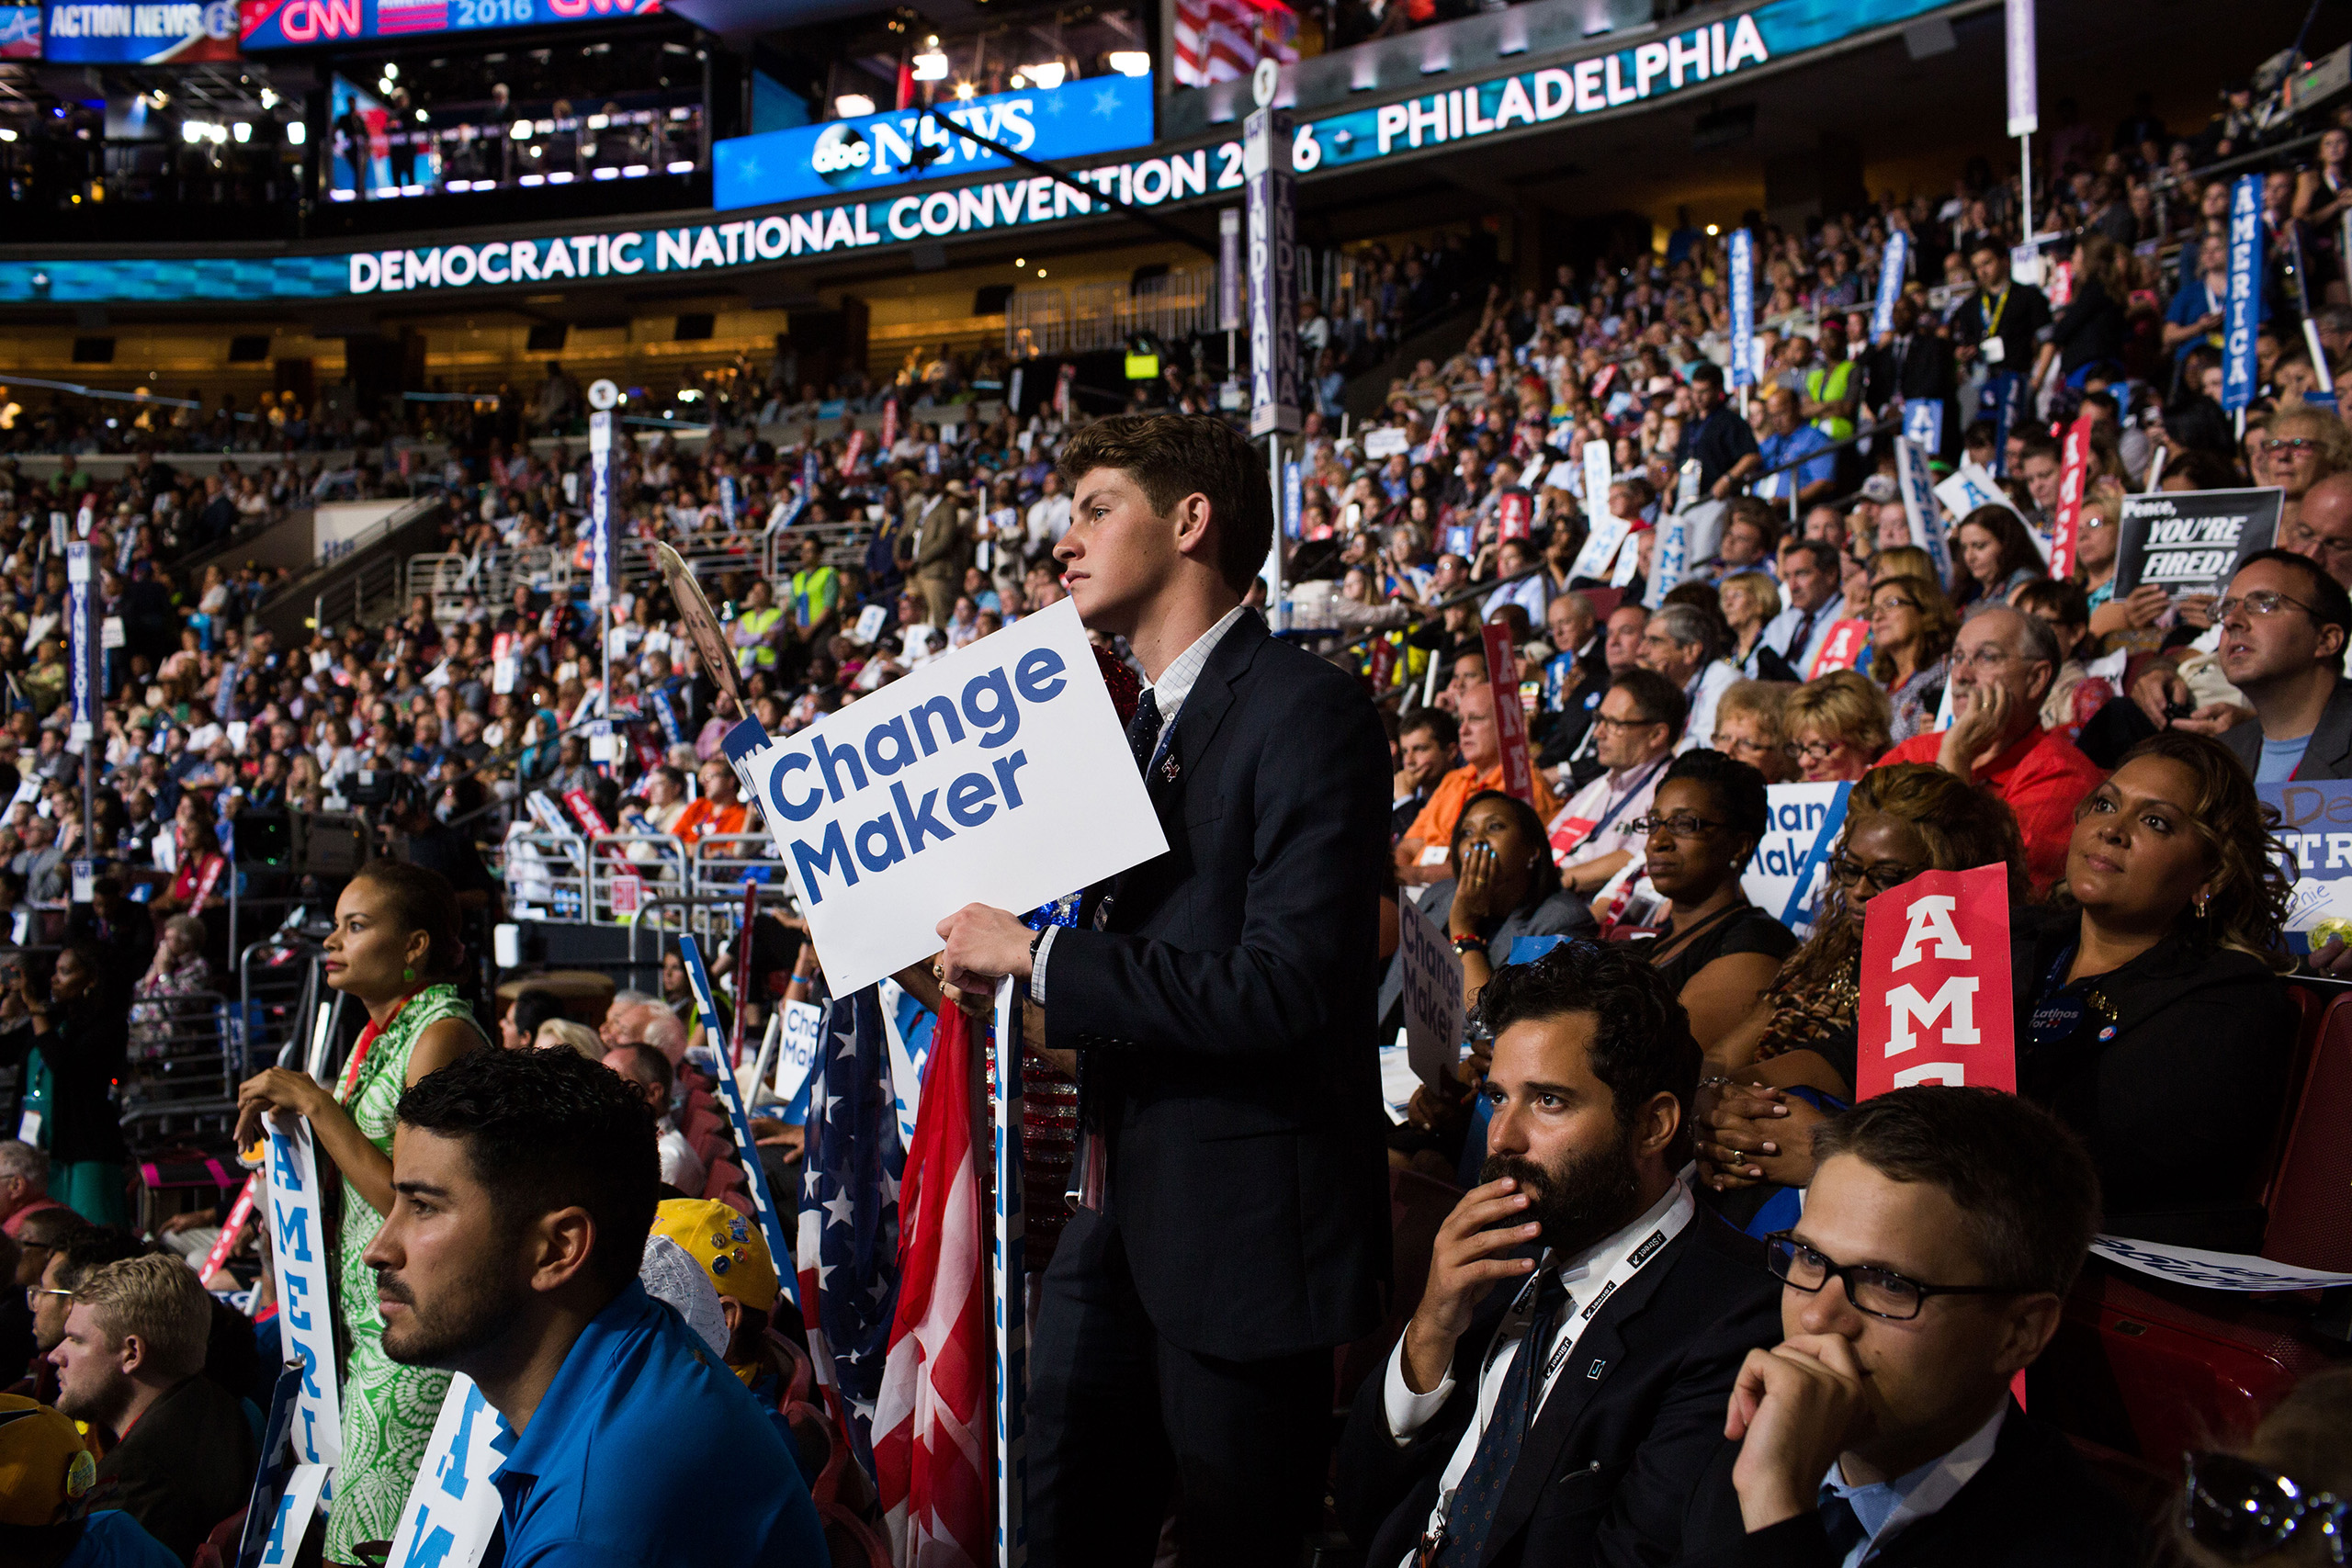 On the floor at the Democratic National Convention at the Wells Fargo Center in Philadelphia, Pennsylvania, on July 26, 2016. (Natalie Keyssar for TIME)